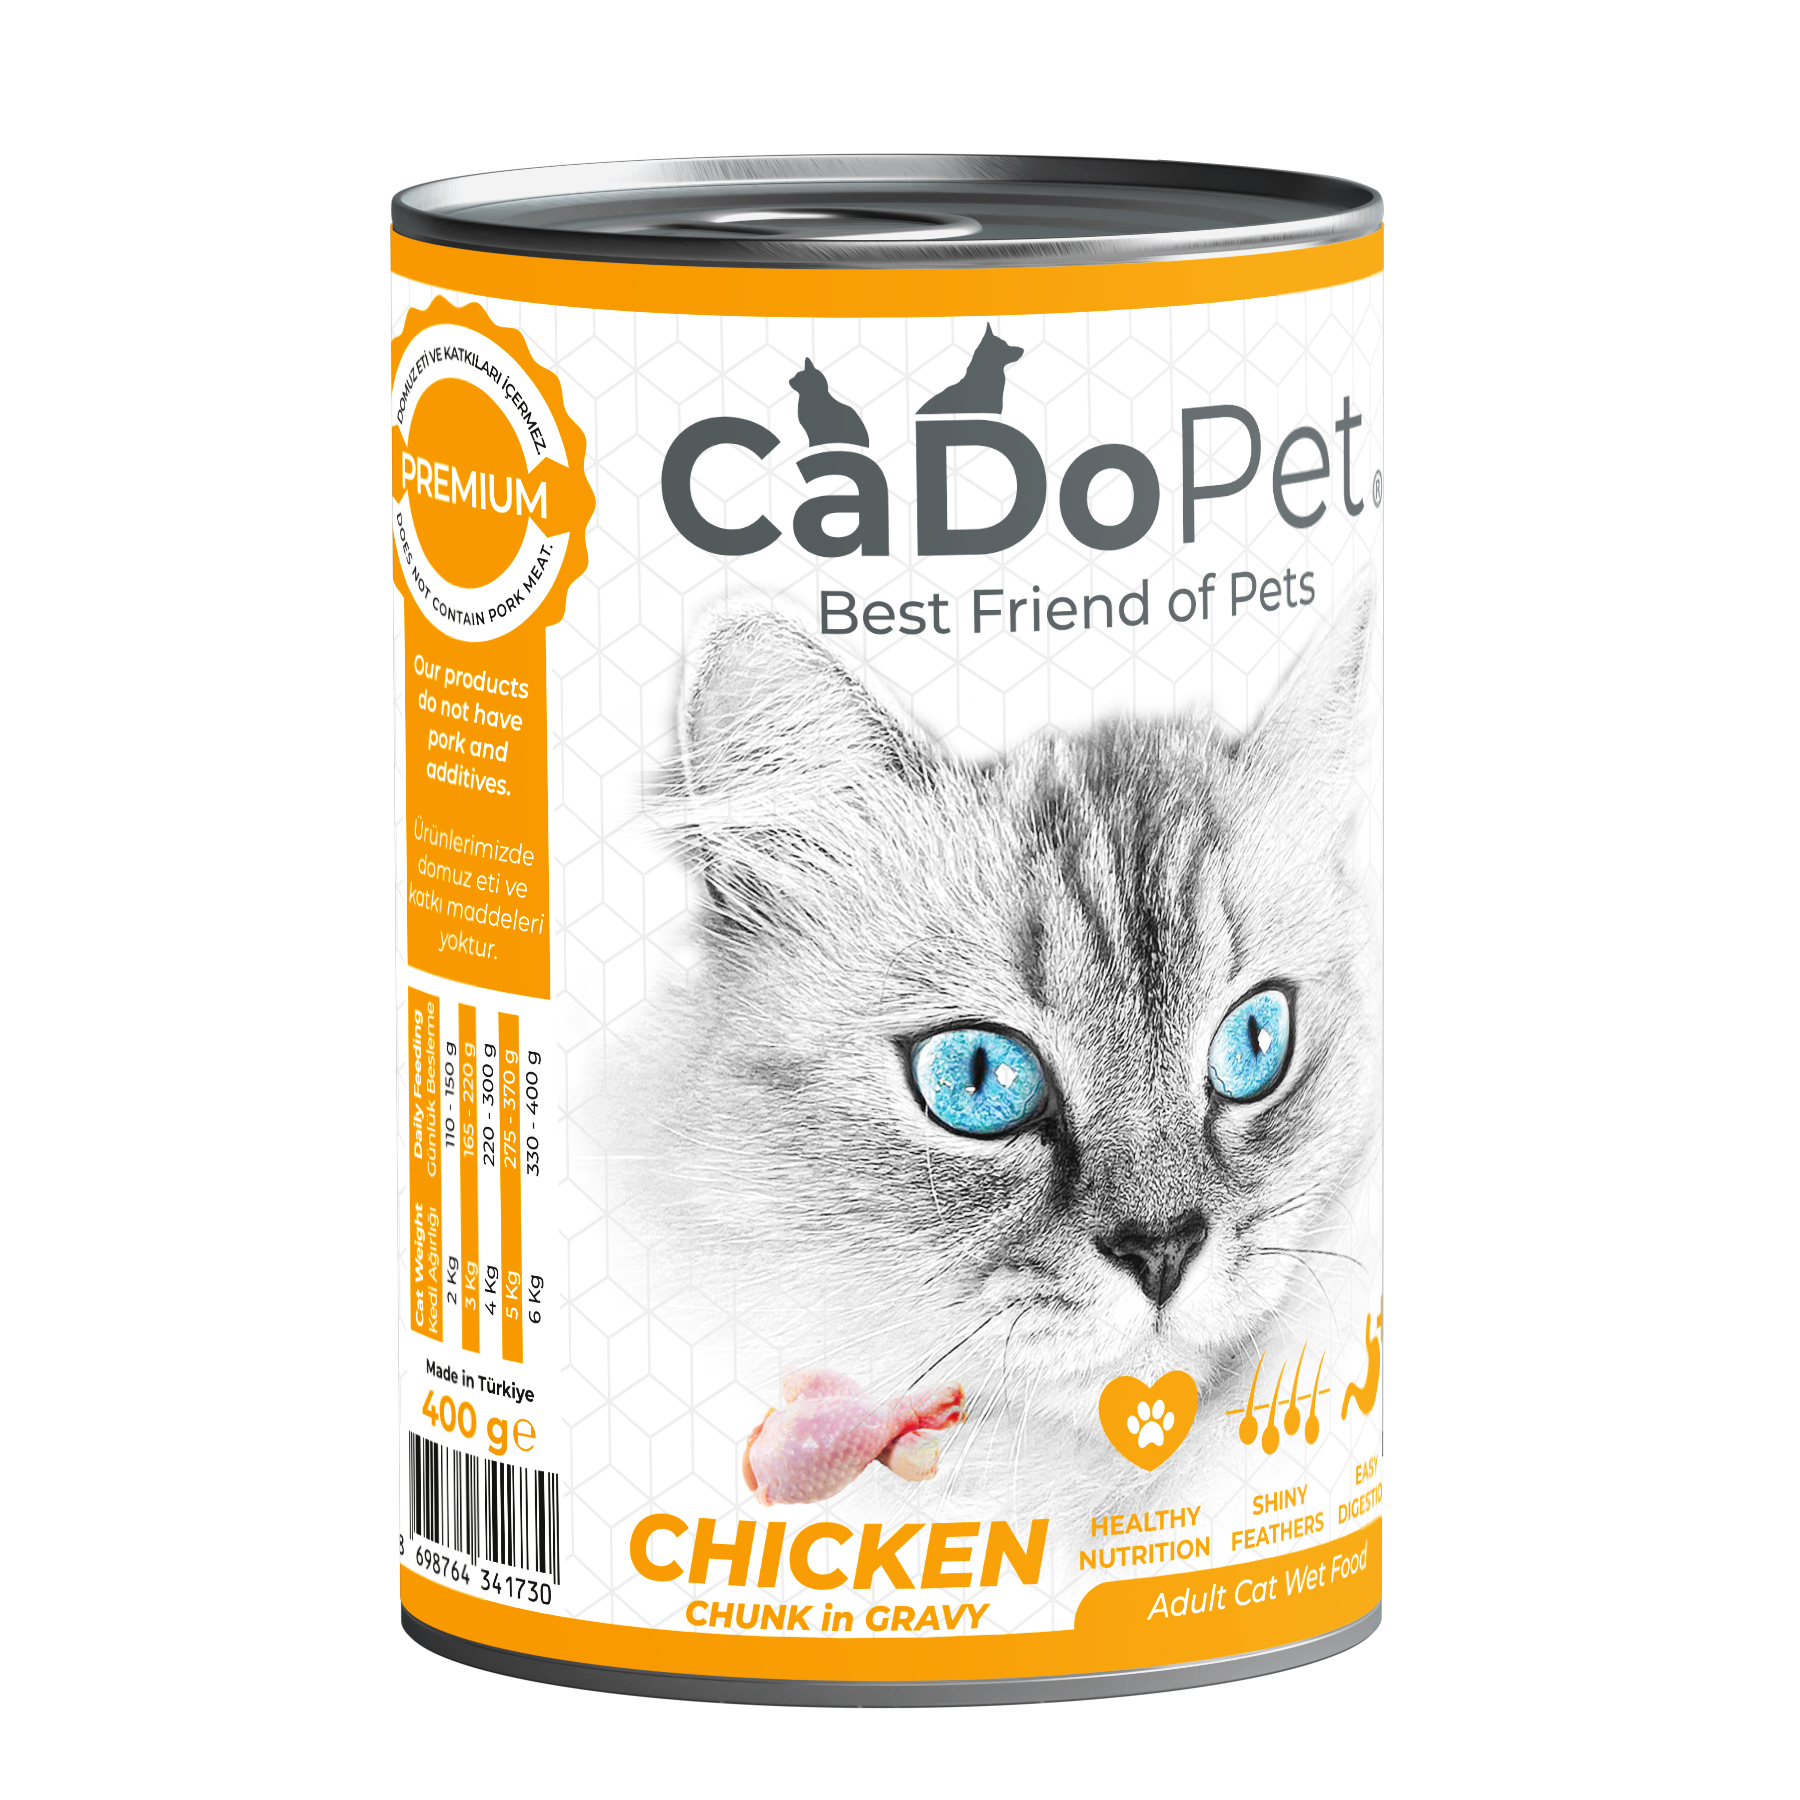 .Adult Cat Wet Food 400g with Chicken Chunk.